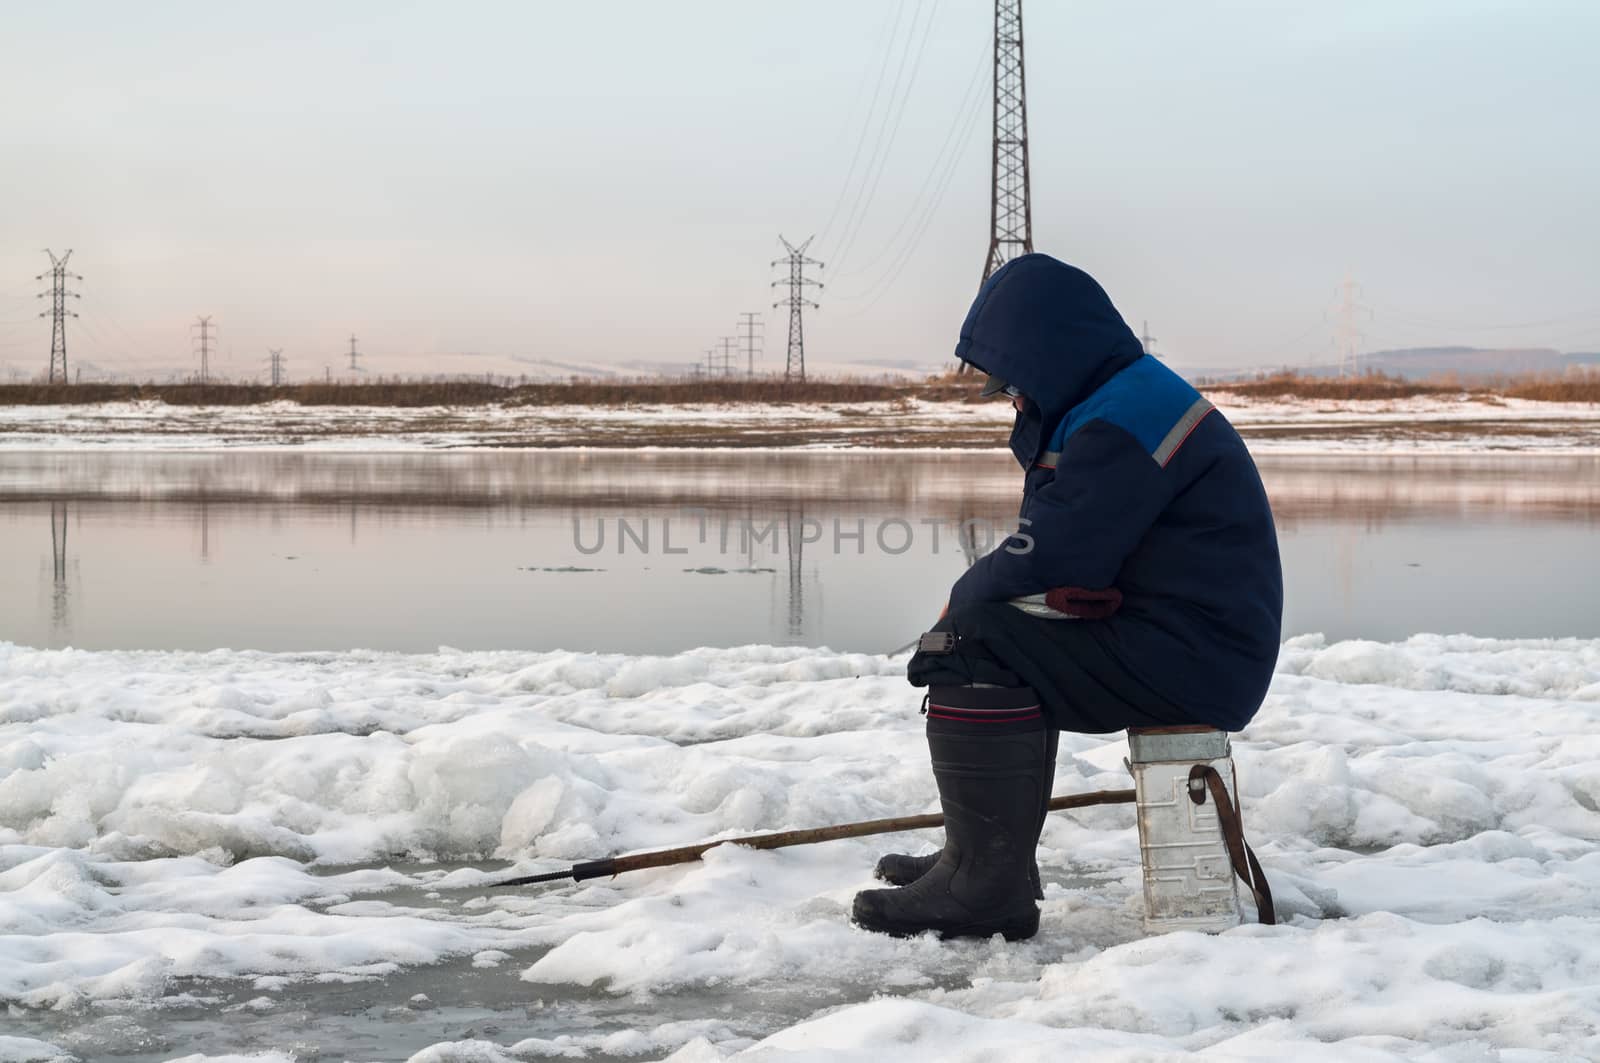 The fisherman on winter fishing fishes